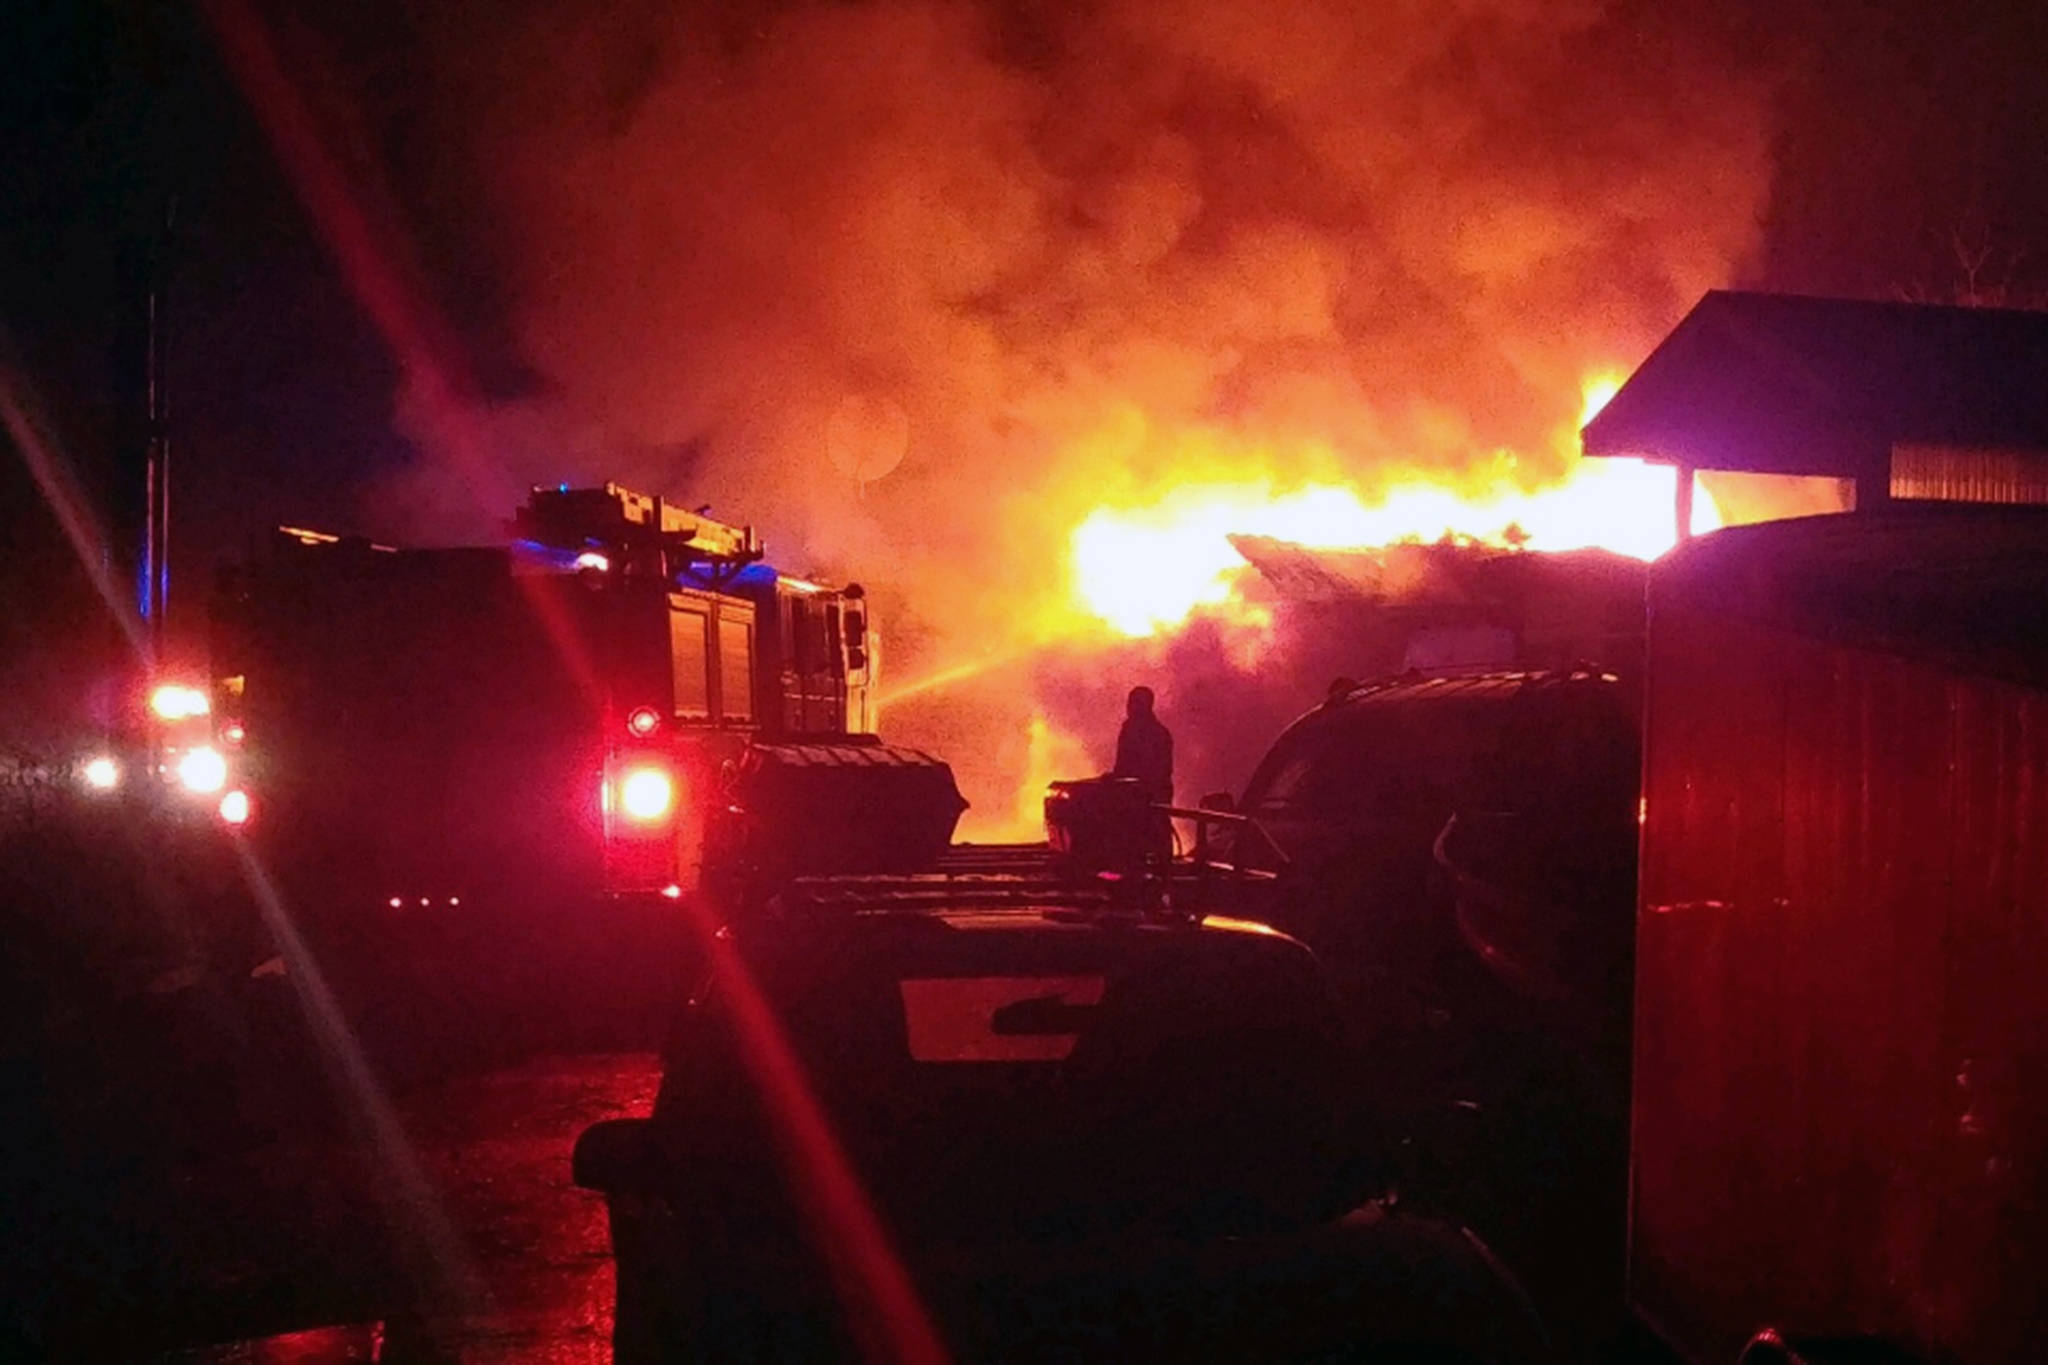 Hoonah Volunteer Fire Department firefighters battle a blaze at cabins in Hoonah on Saturday, Nov. 24, 2018. (Courtesy Photo | Hoonah Volunteer Fire Department)